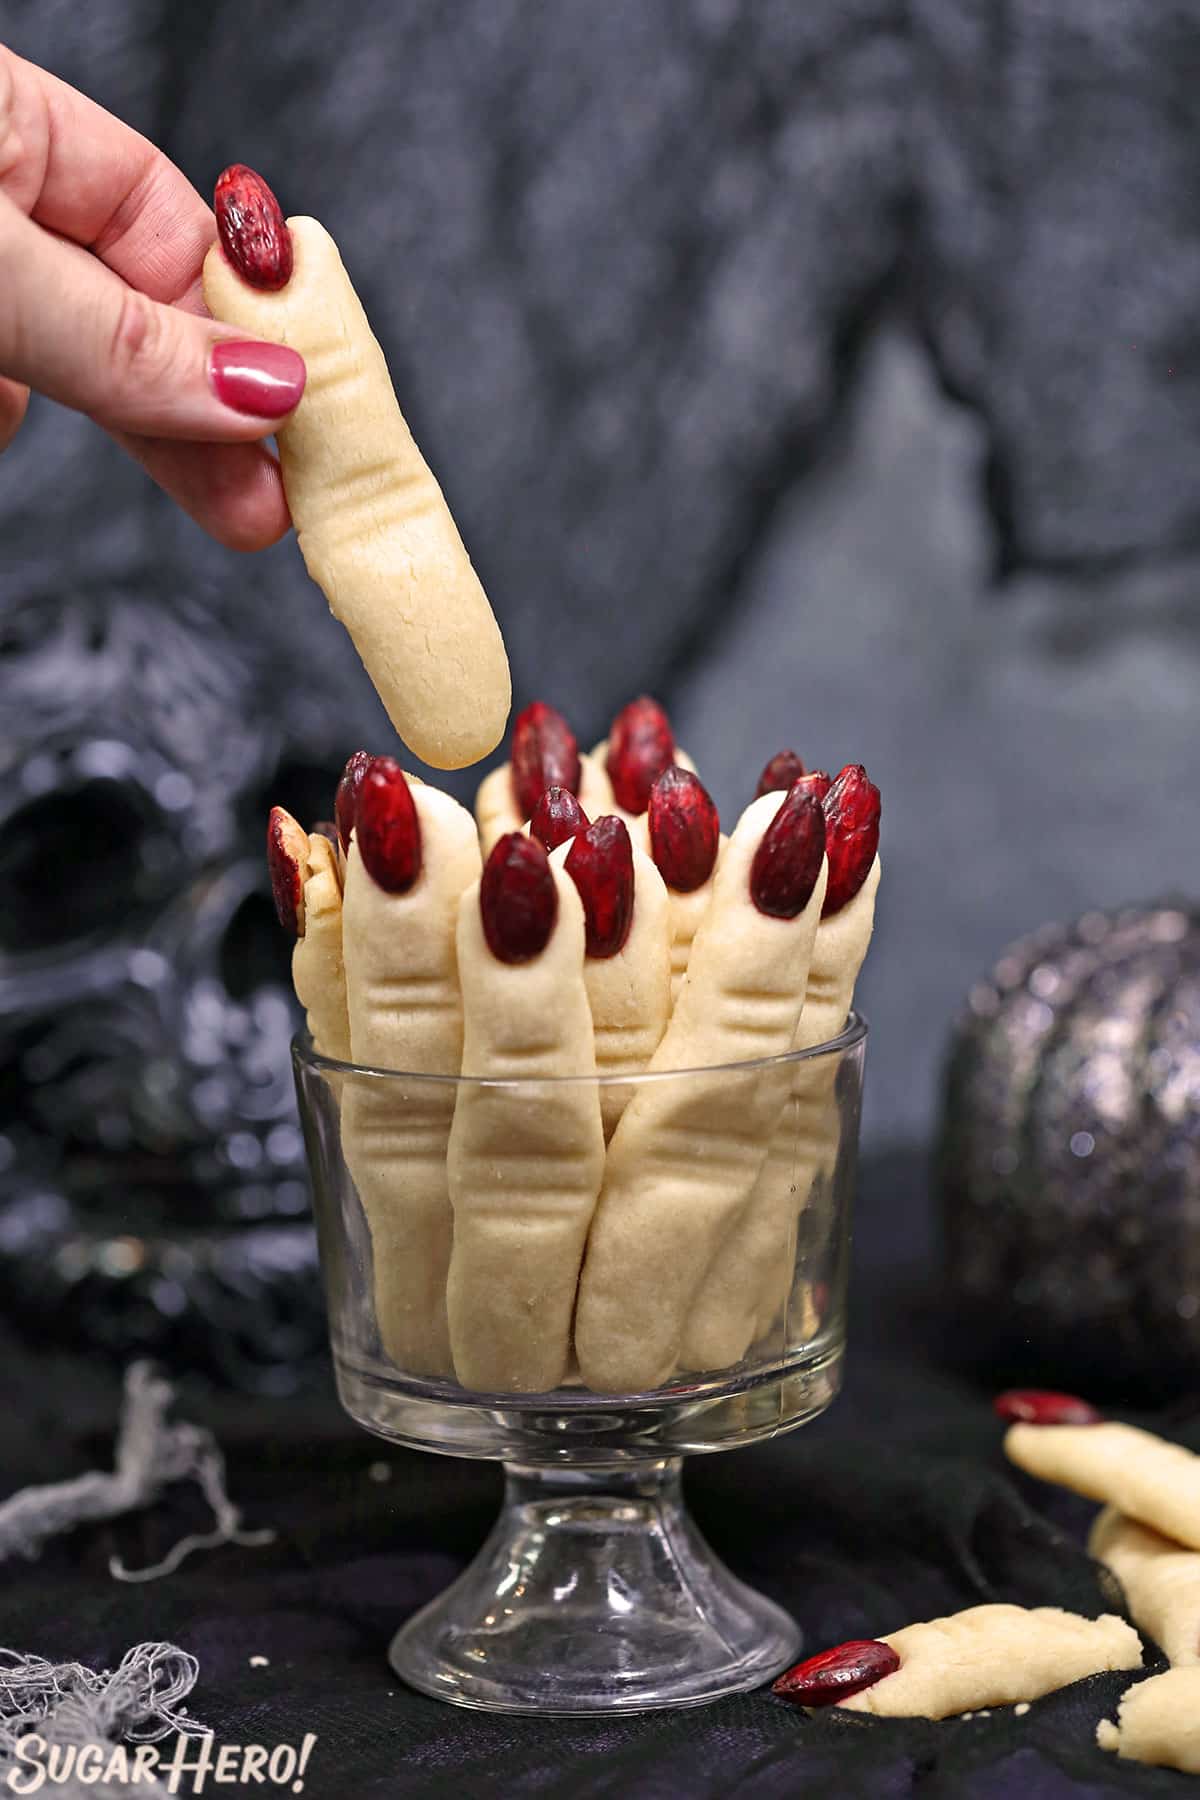 Witch Finger Cookies upright in a glass with a hand pulling one cookie out.